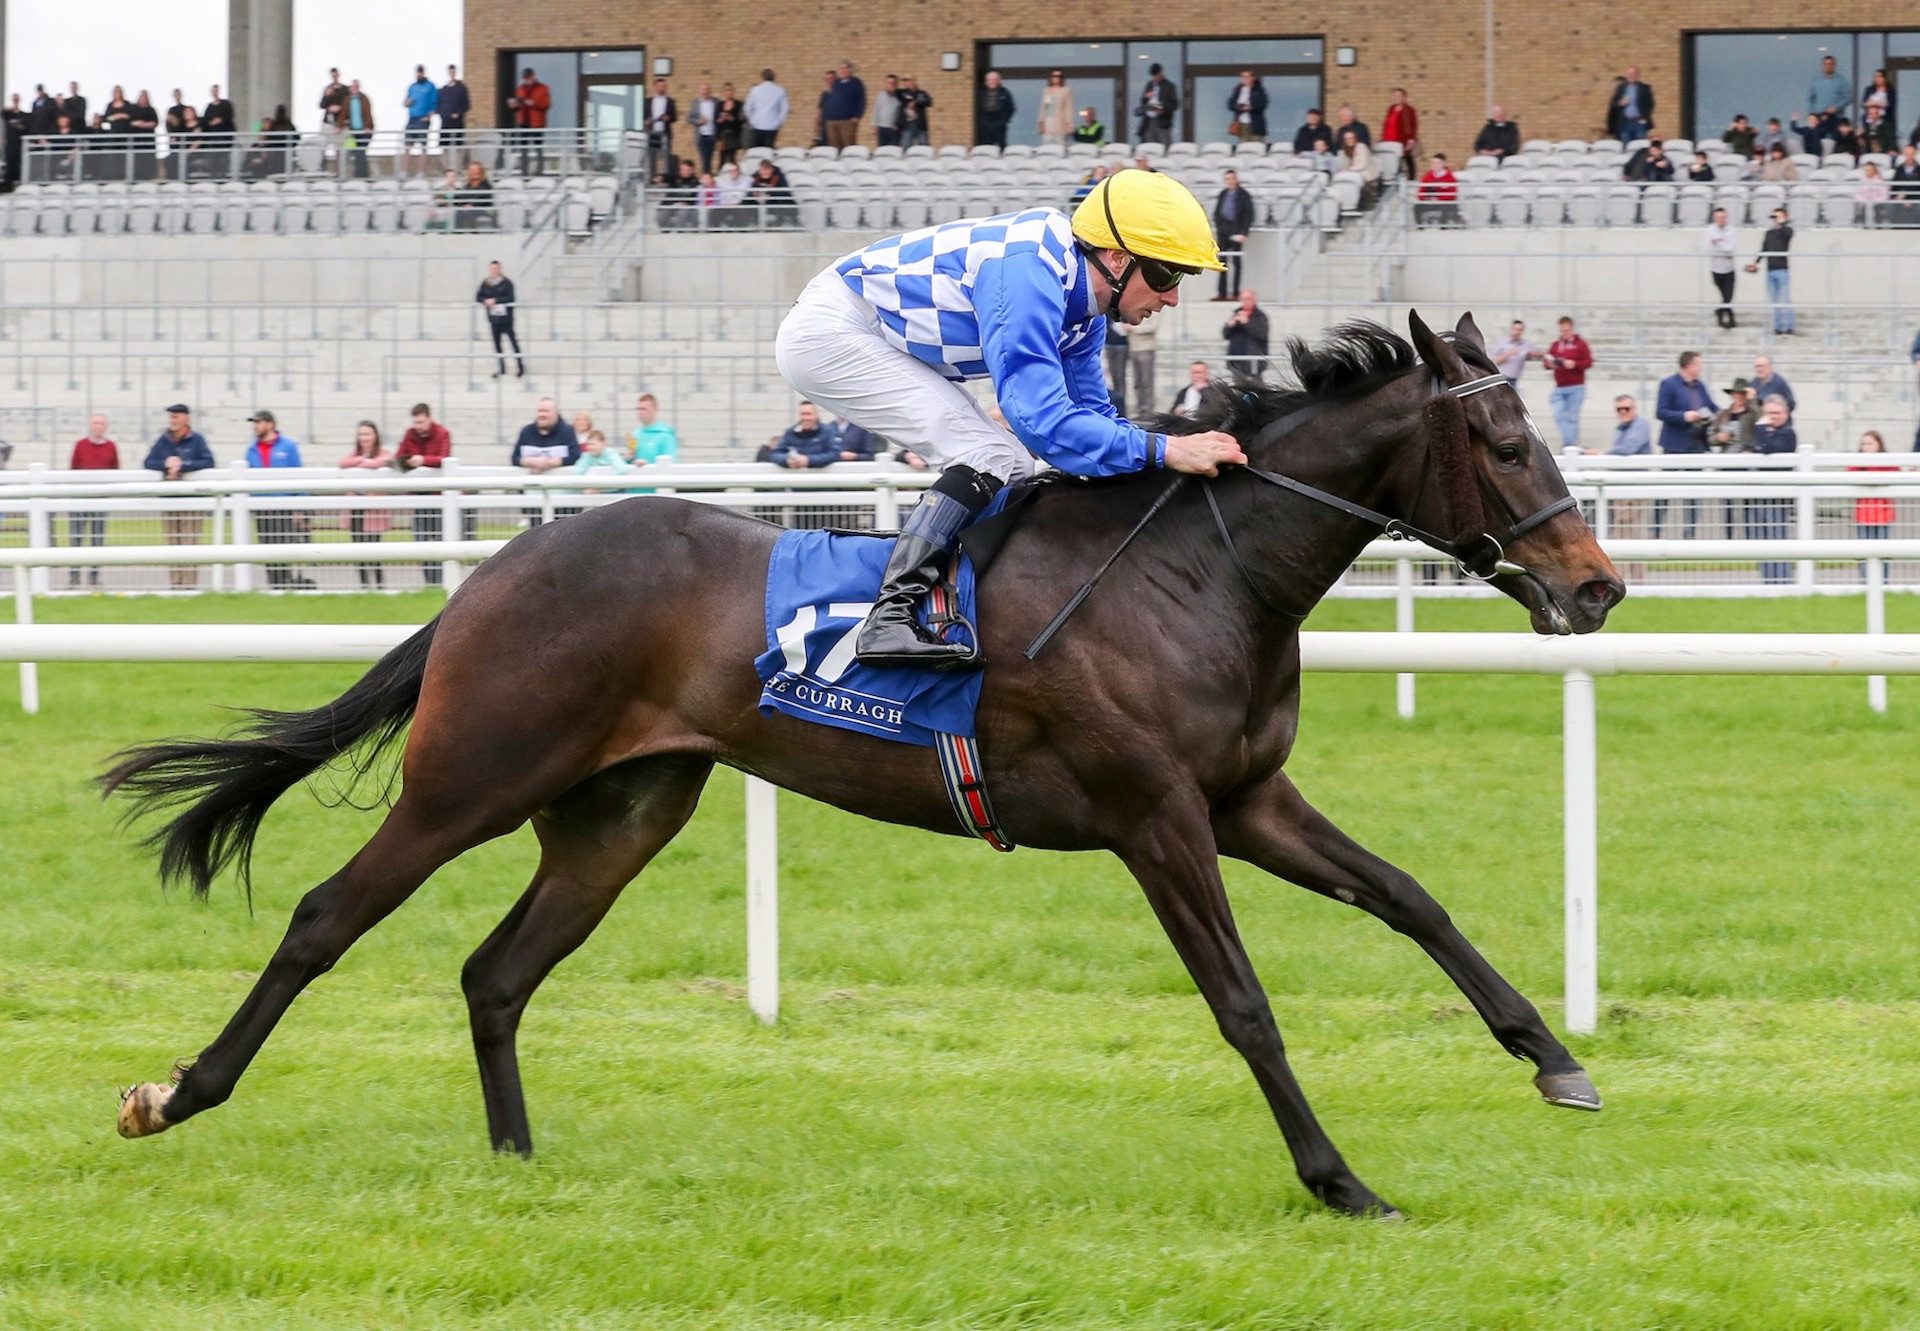 Fascinating Rock (Fastnet Rock) winning the G3 Mooresbridge Stakes at the Curragh